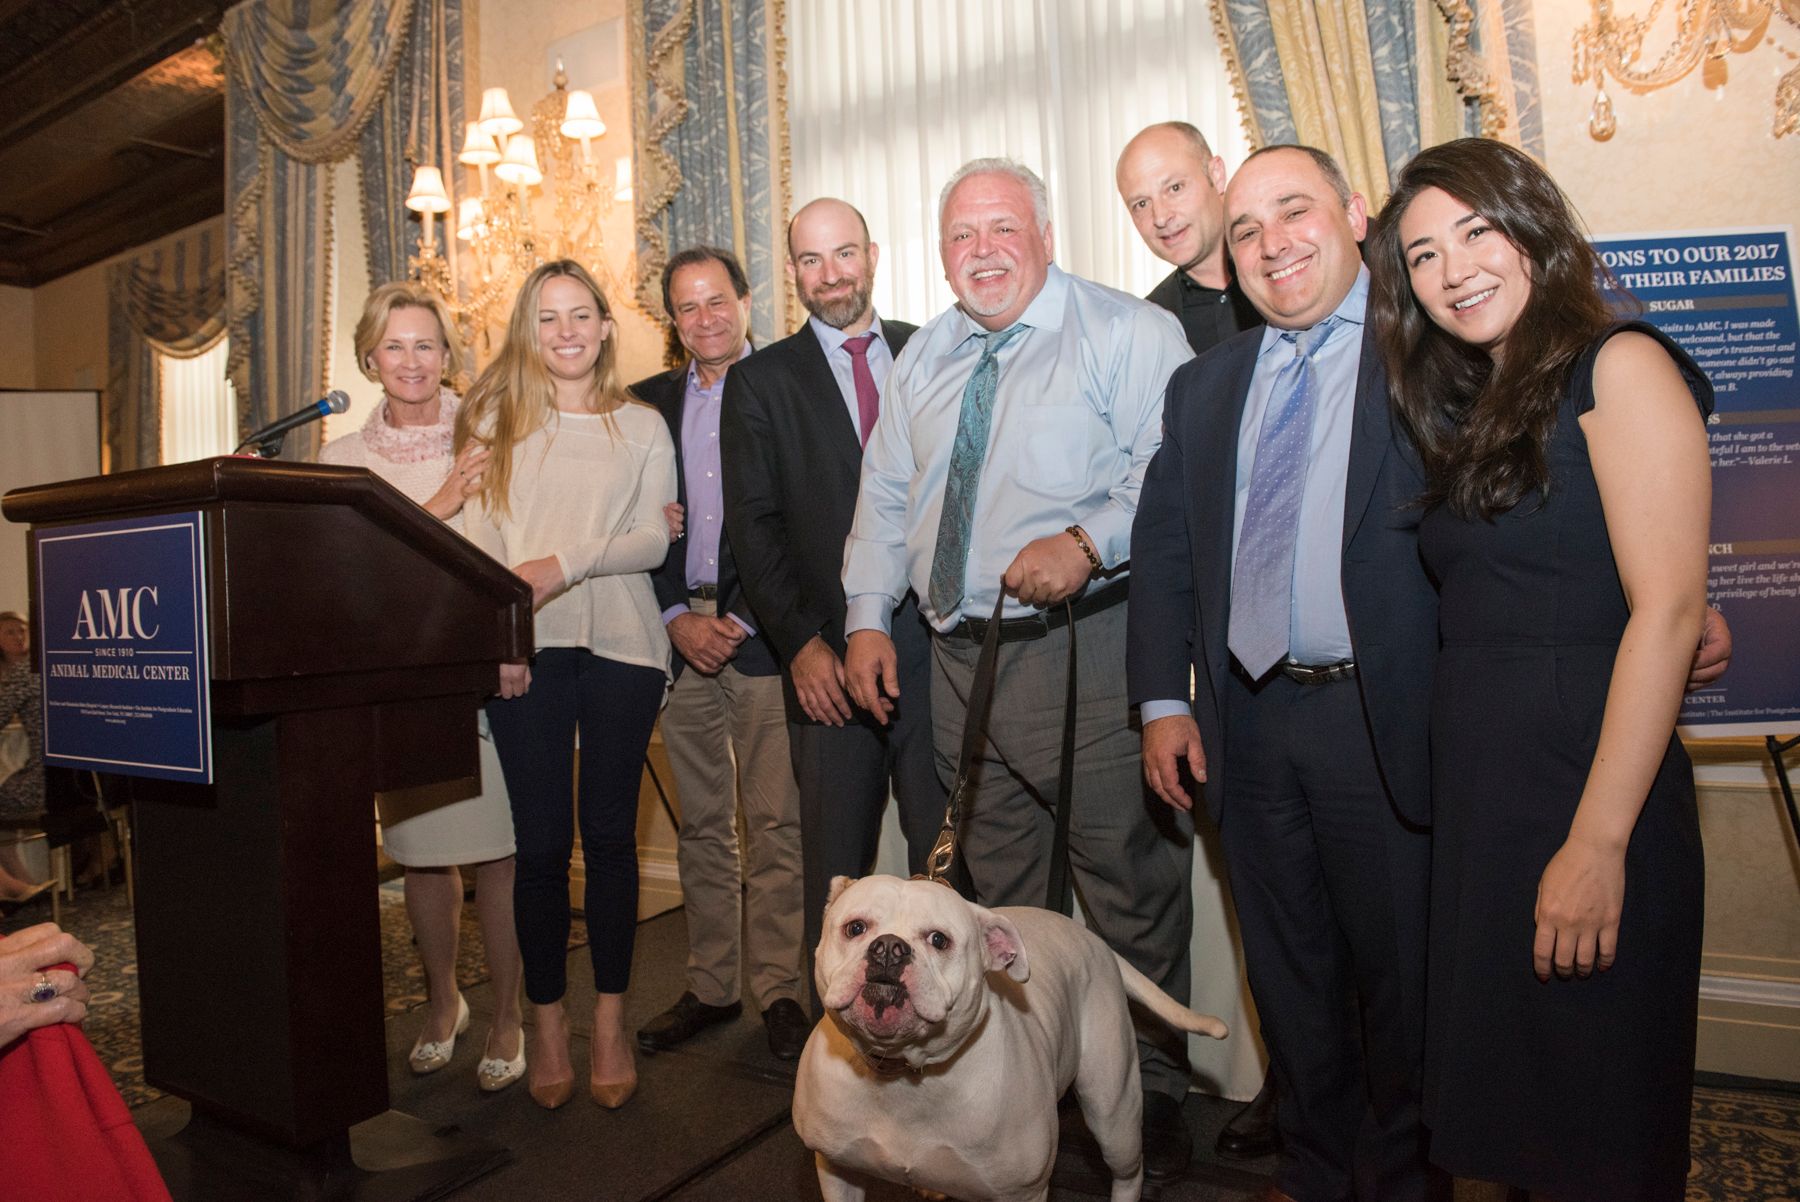 Sugar the dog standing with her owner and AMC staff being honored as a living legend